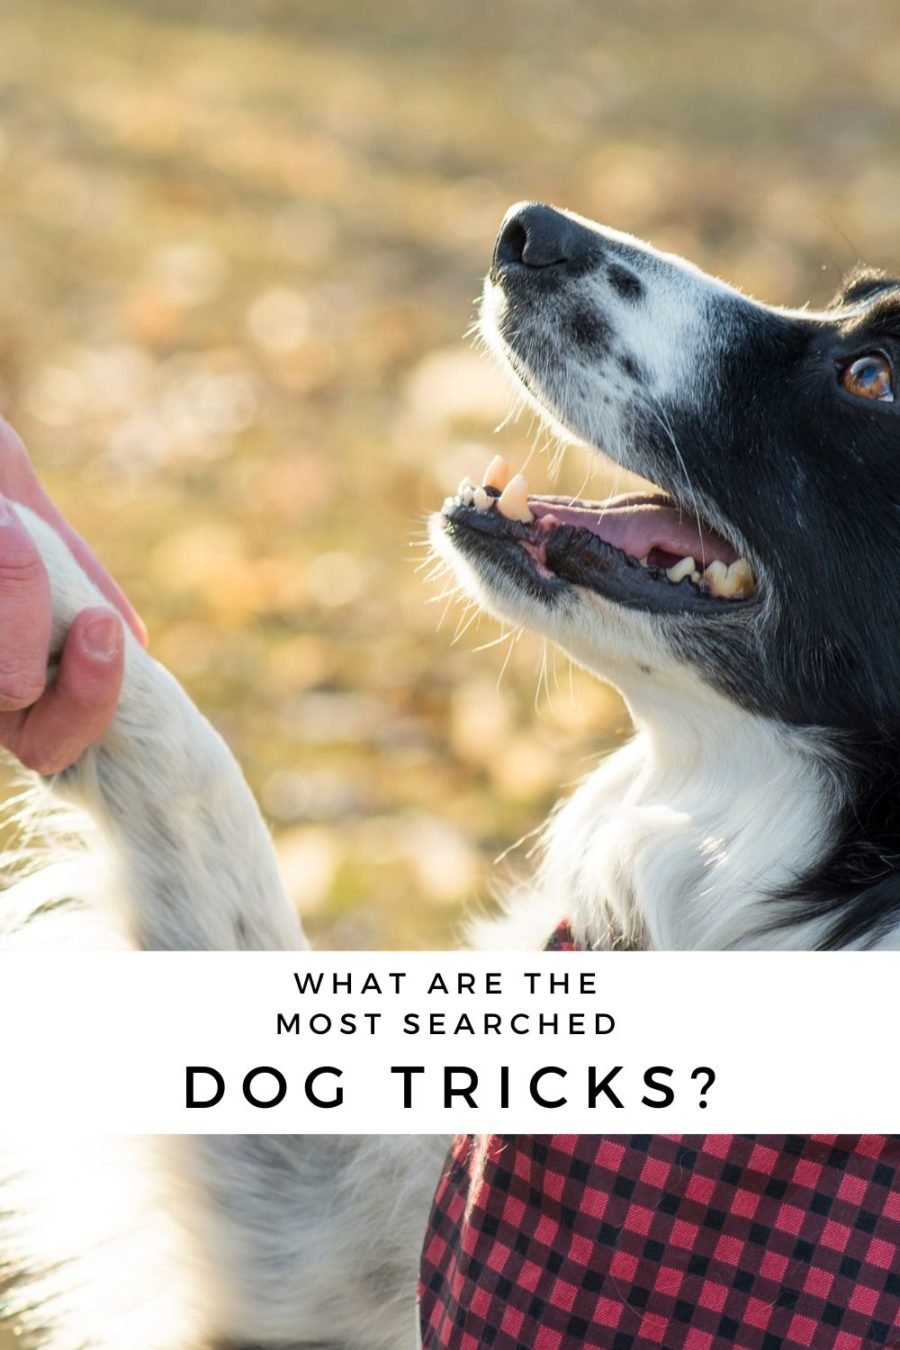 Most searched dog tricks